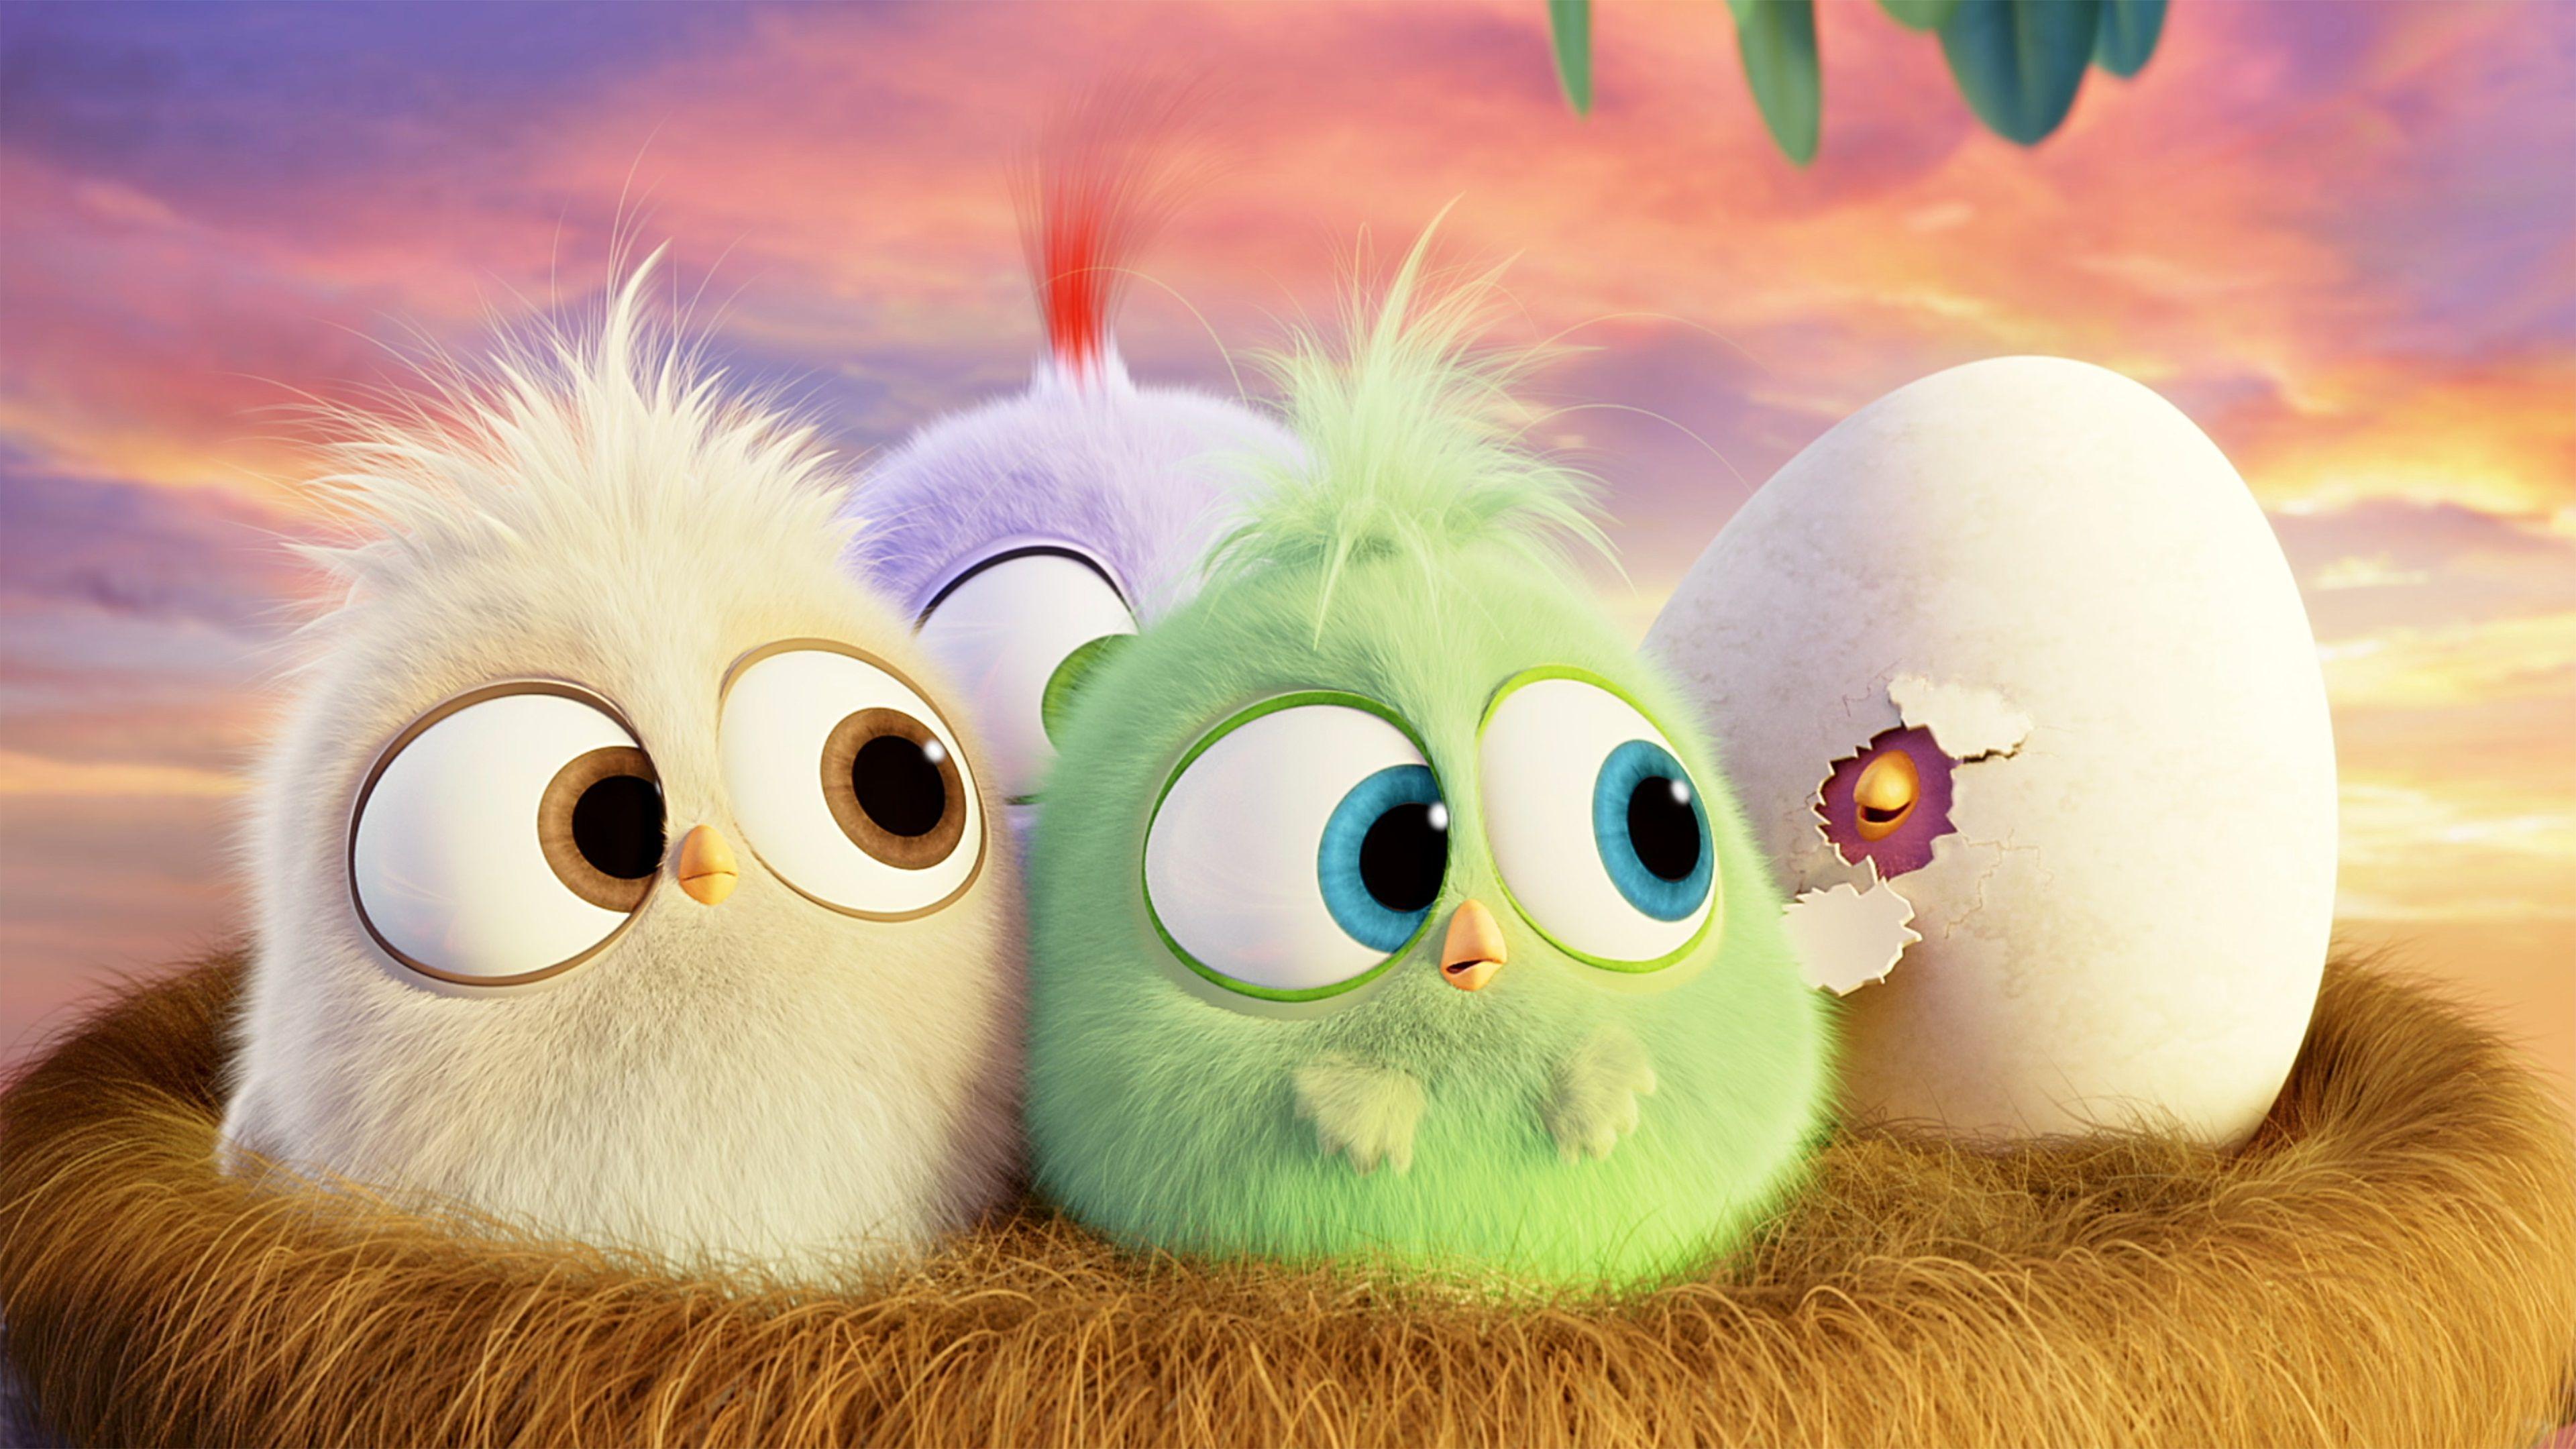 Angry Birds HD Wallpapers - Top Free Angry Birds HD Backgrounds ...